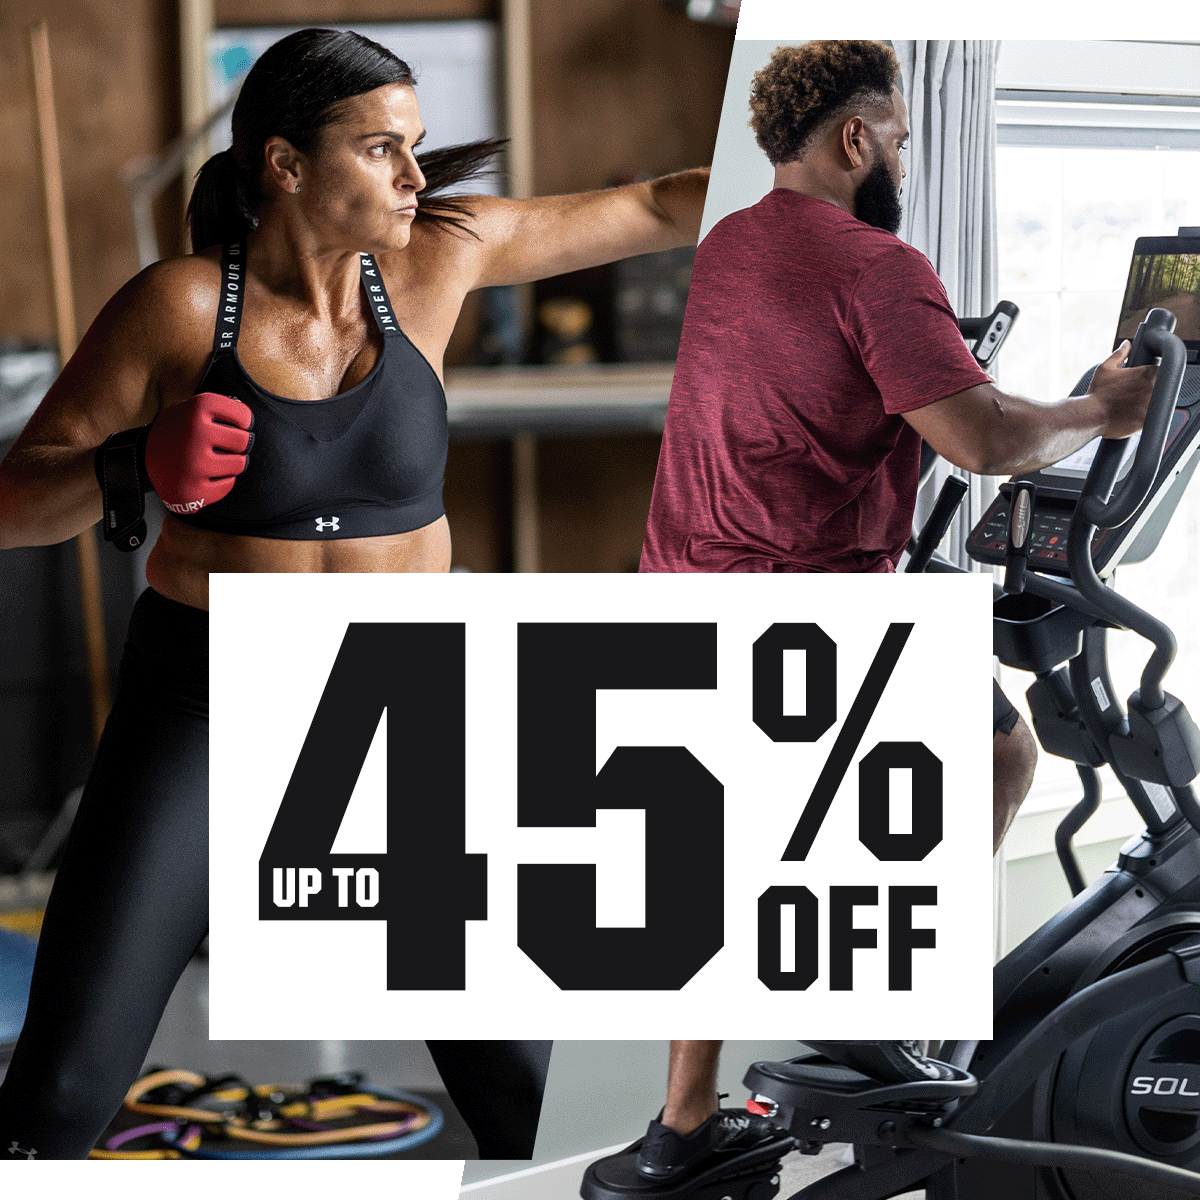 Up to 45% off.